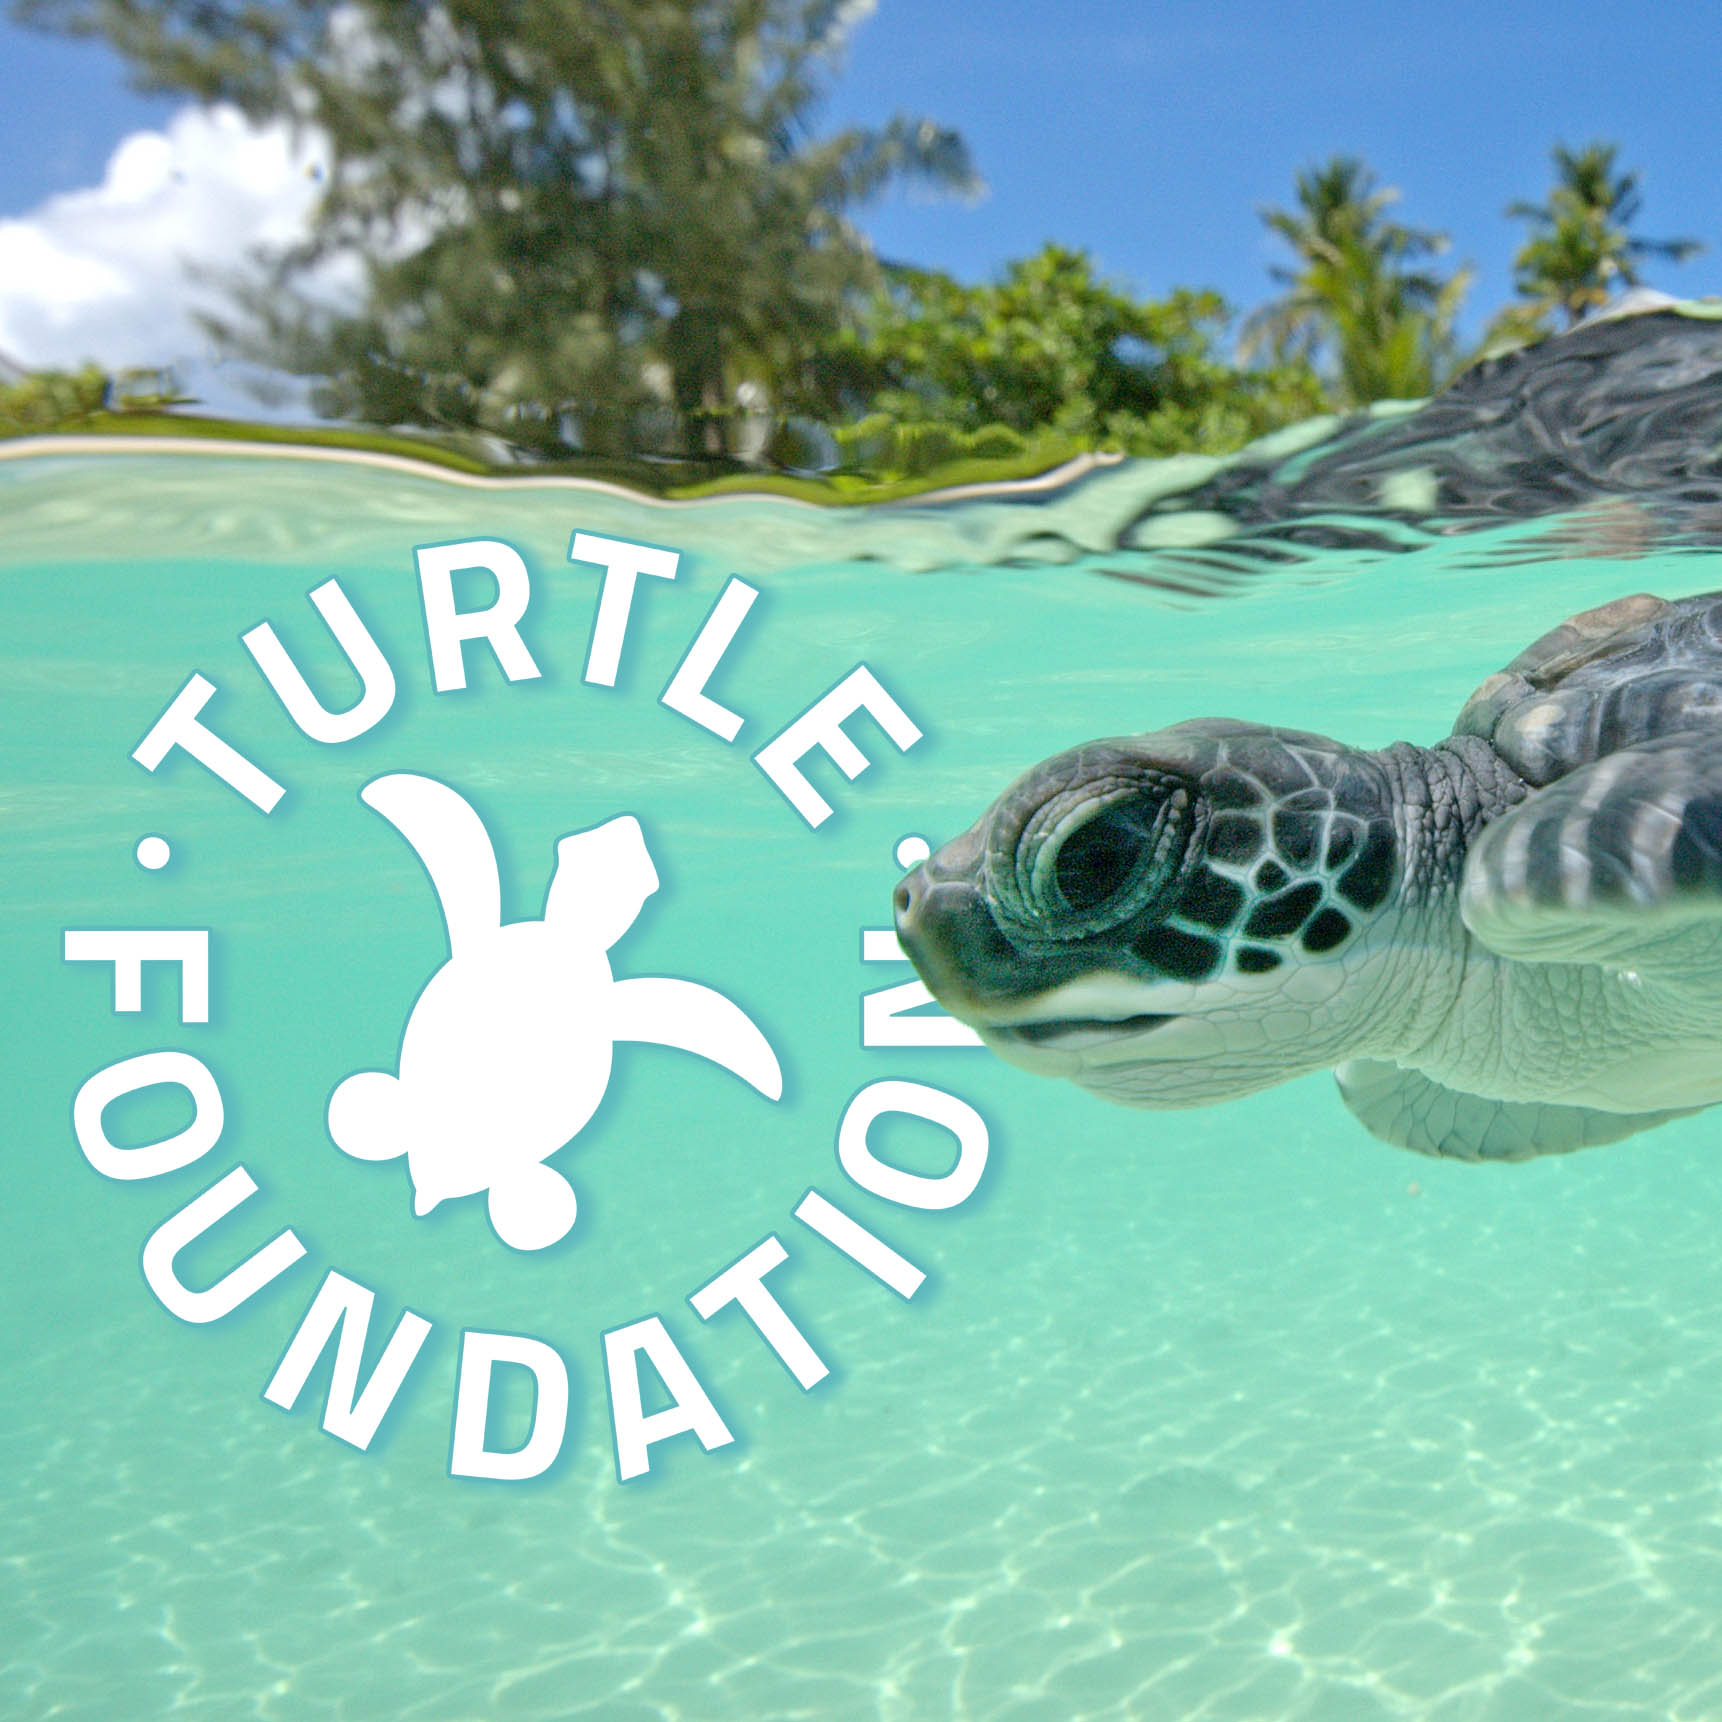 Turtle Foundation Protecting Sea Turtles And Their Habitats